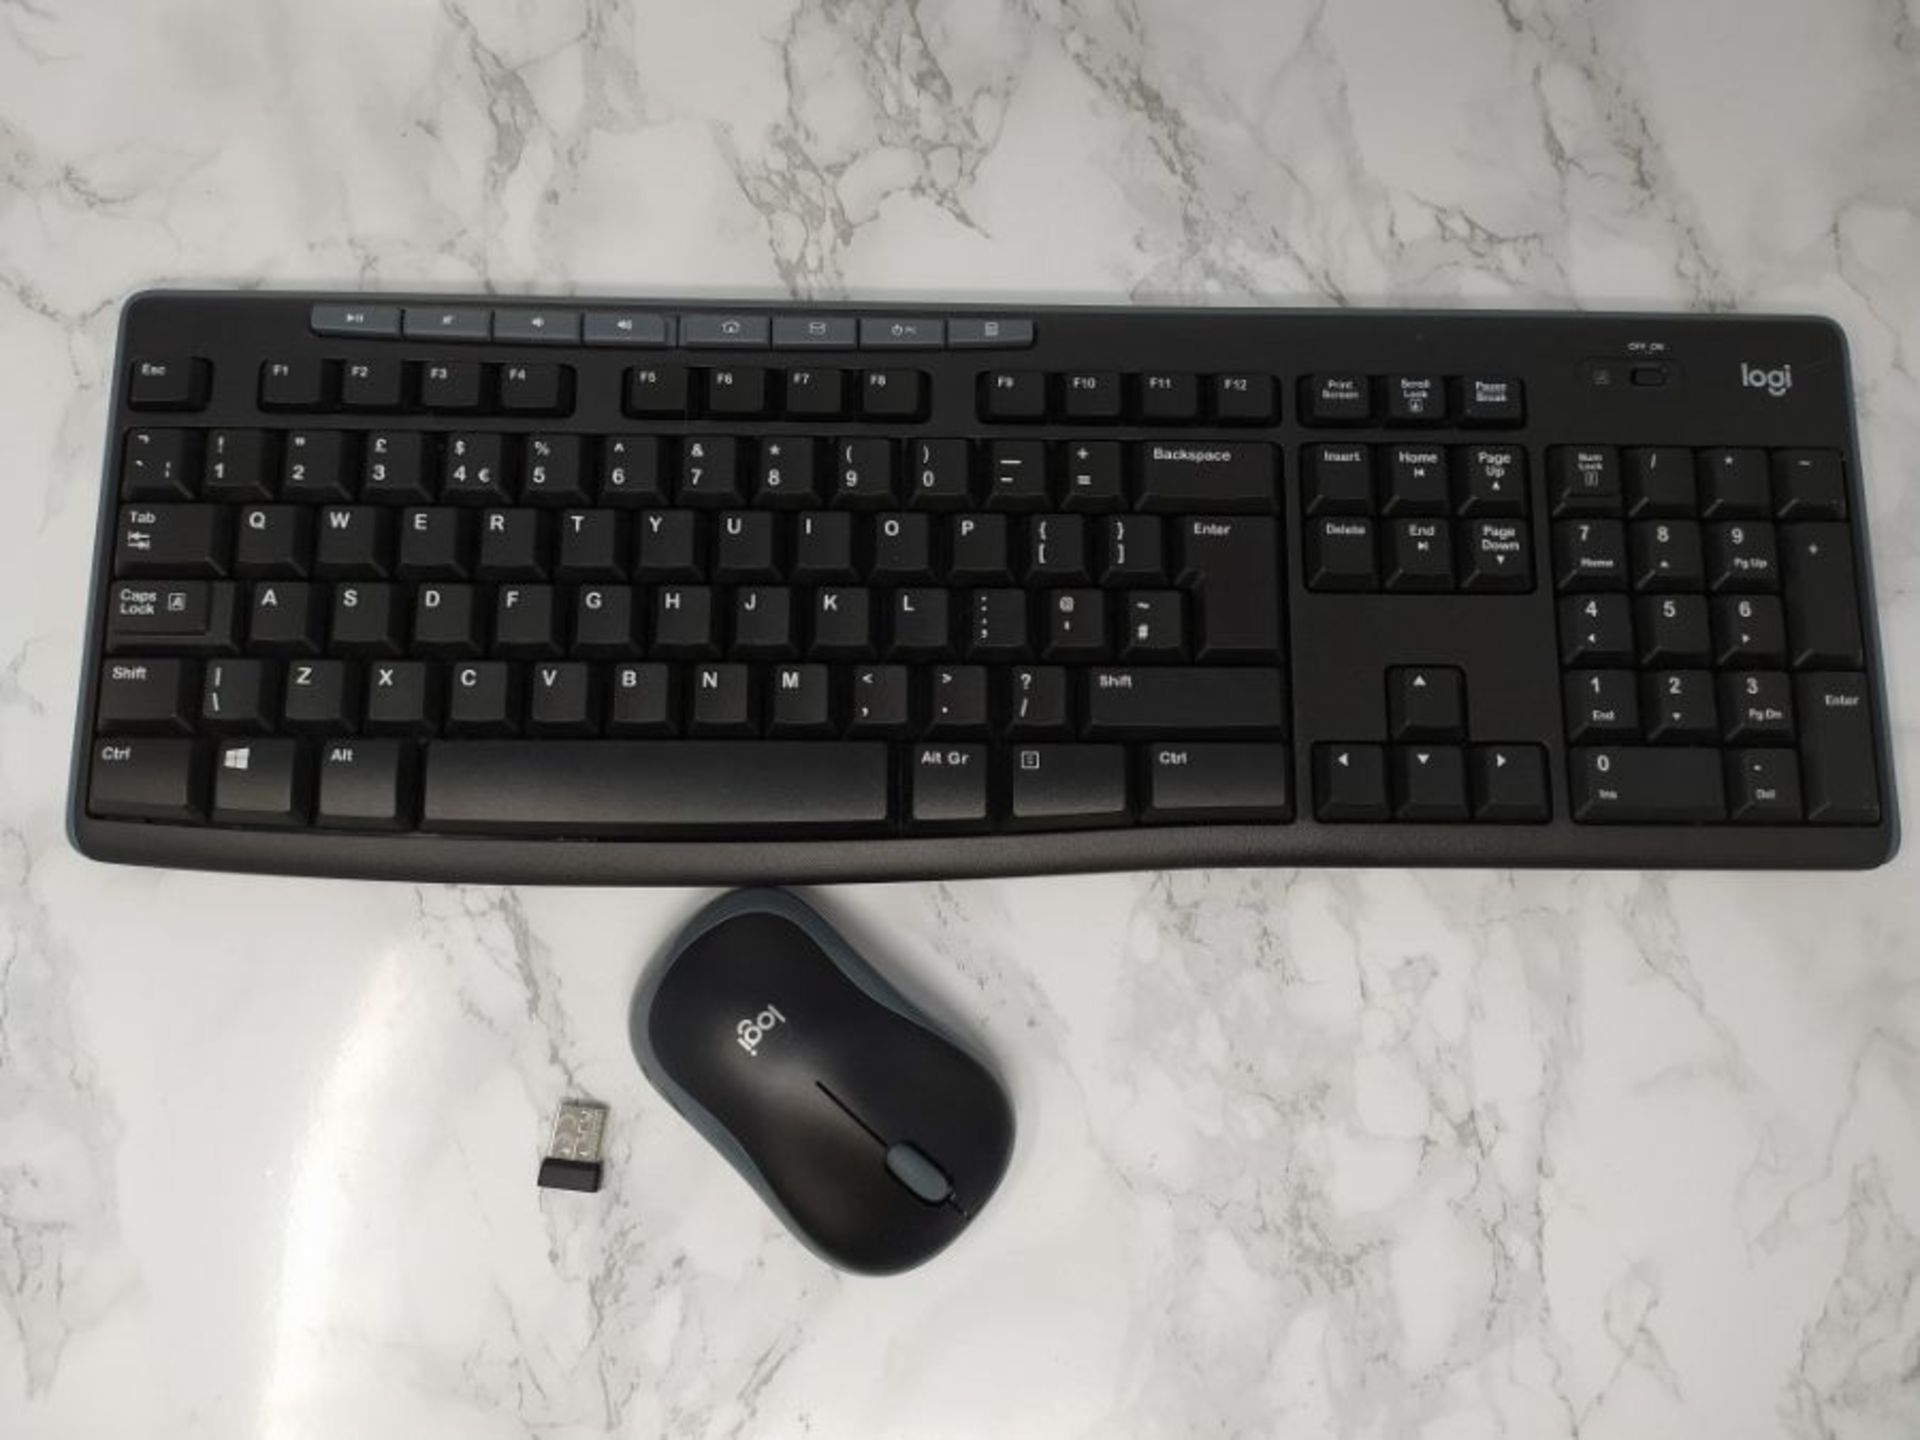 Logitech MK270 Wireless Keyboard and Mouse Combo for Windows, 2.4 GHz Wireless, Compac - Image 2 of 2